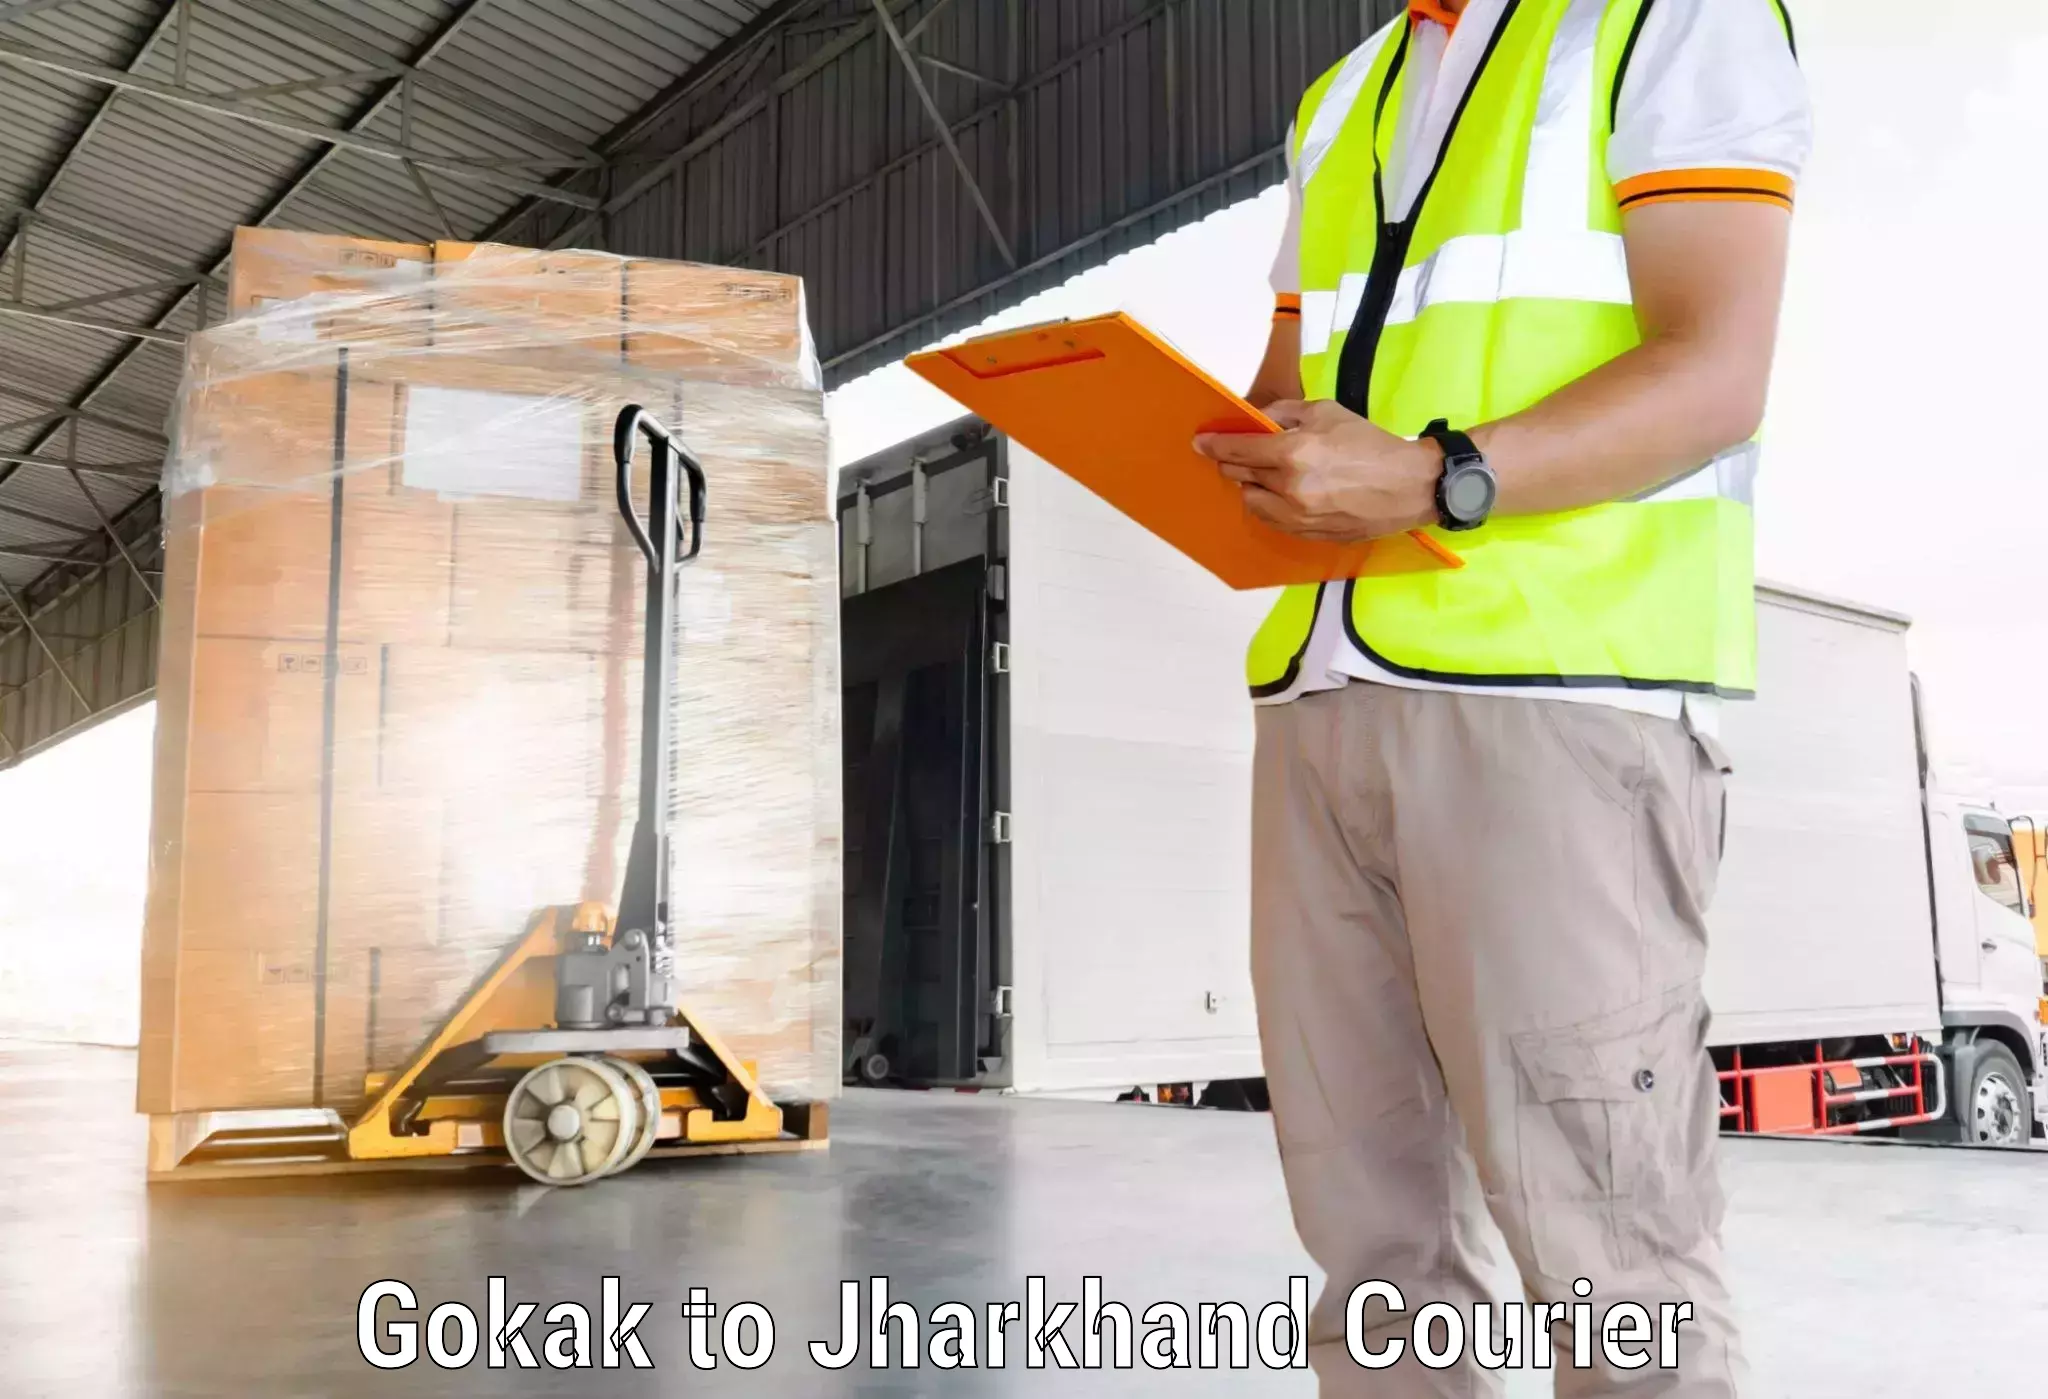 On-demand delivery in Gokak to Bokaro Steel City